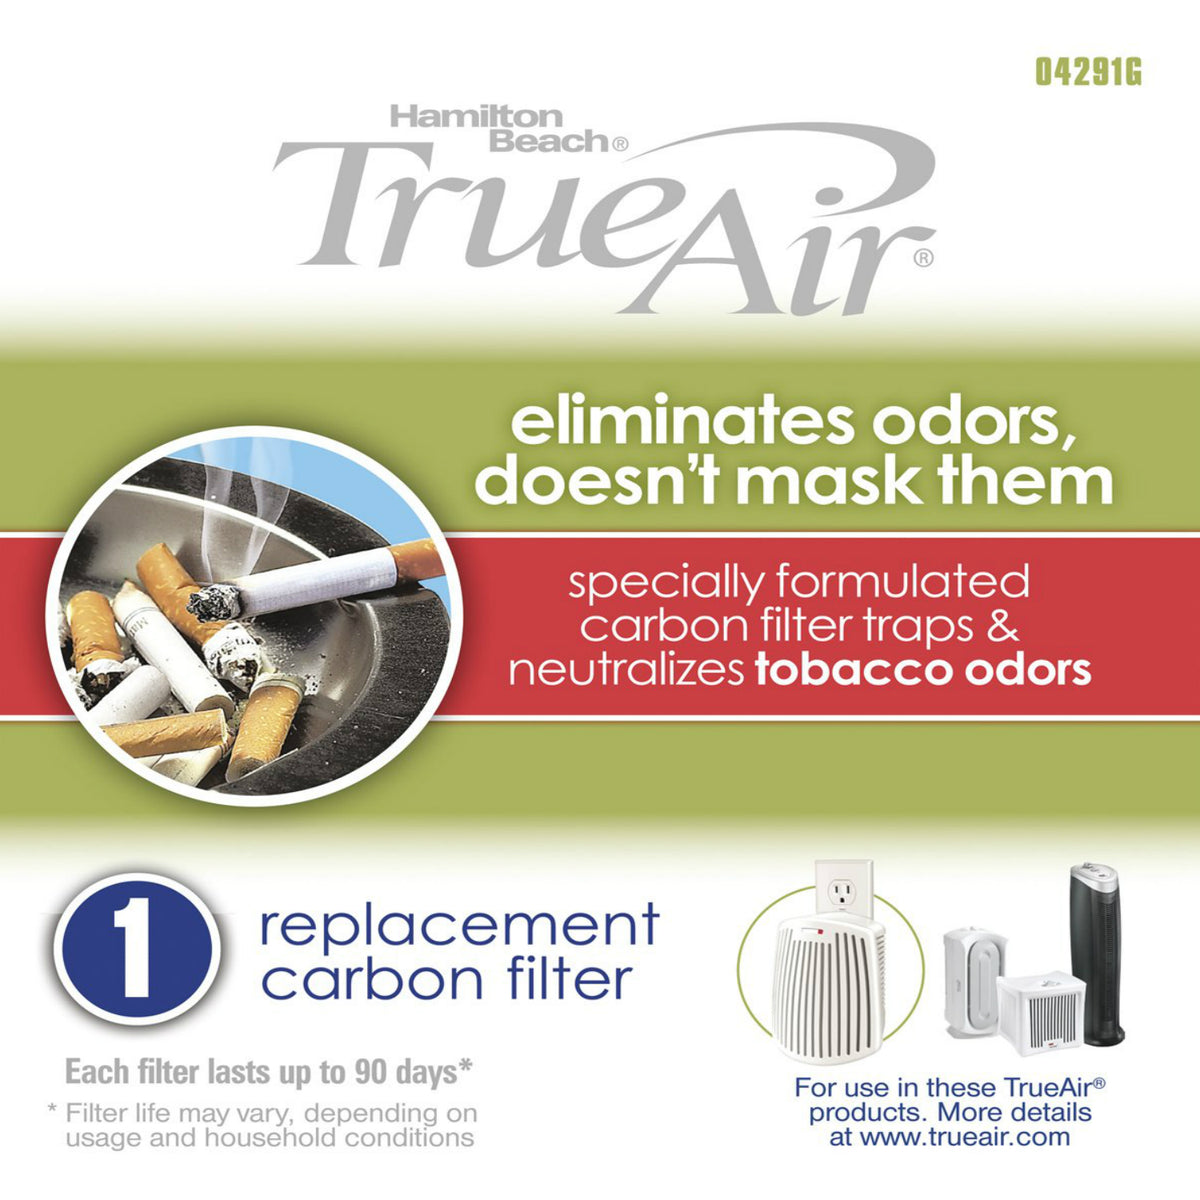 Buy febreze true air replacement filters - Online store for air filtration, air filter accessories in USA, on sale, low price, discount deals, coupon code